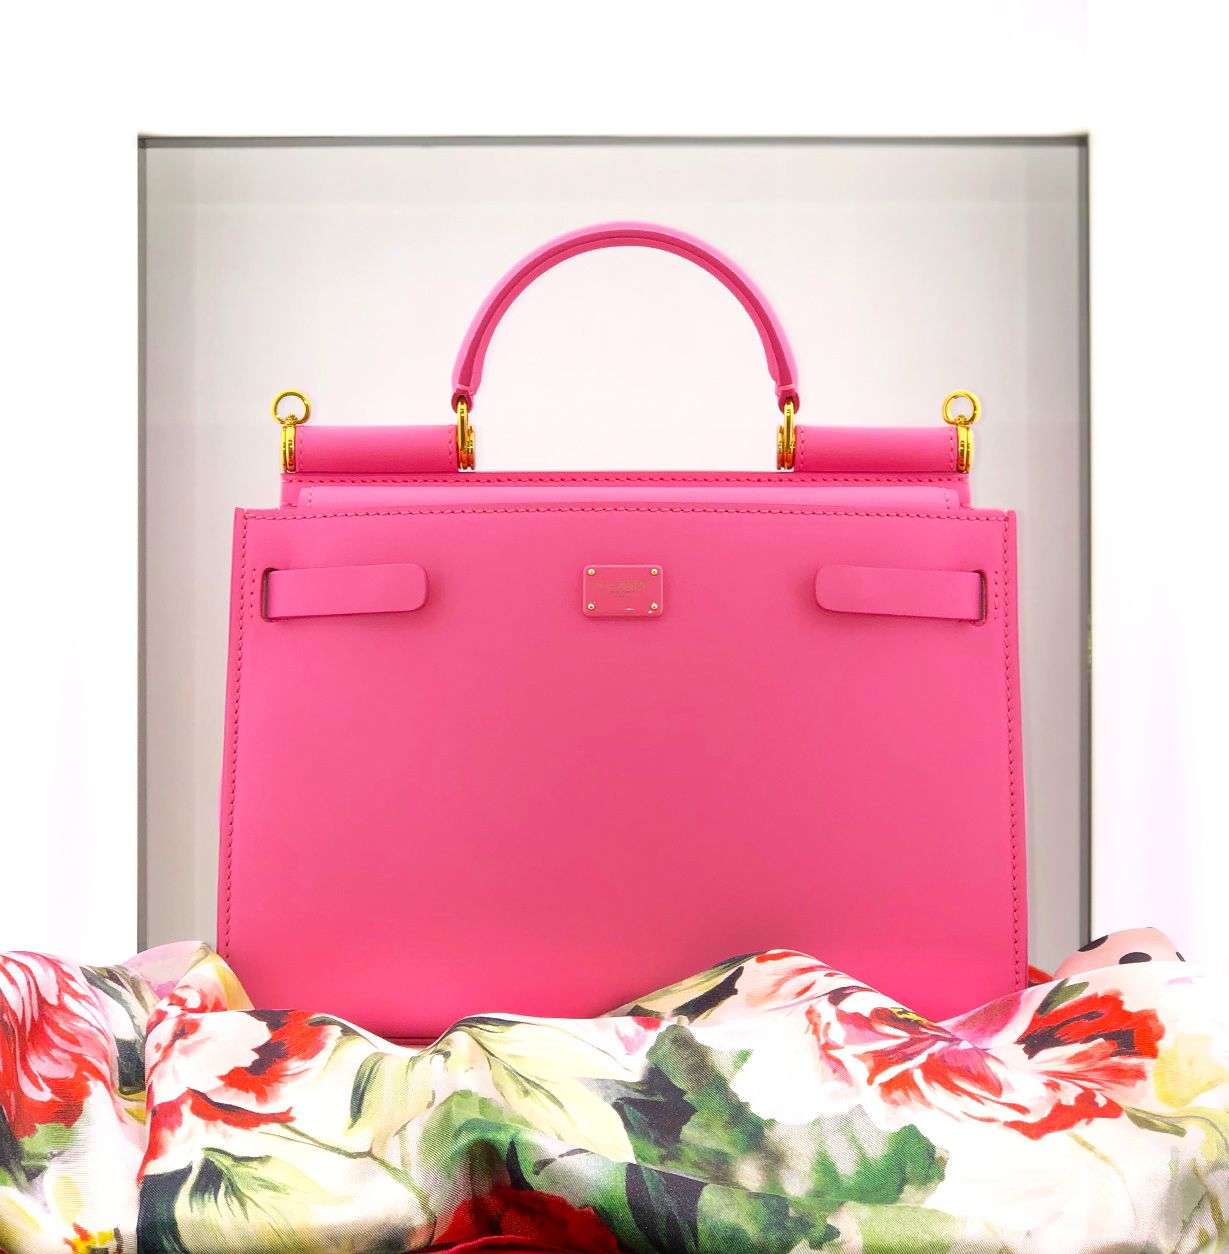 Dolce & Gabbana limited quantity Sicily 62 bag in pink